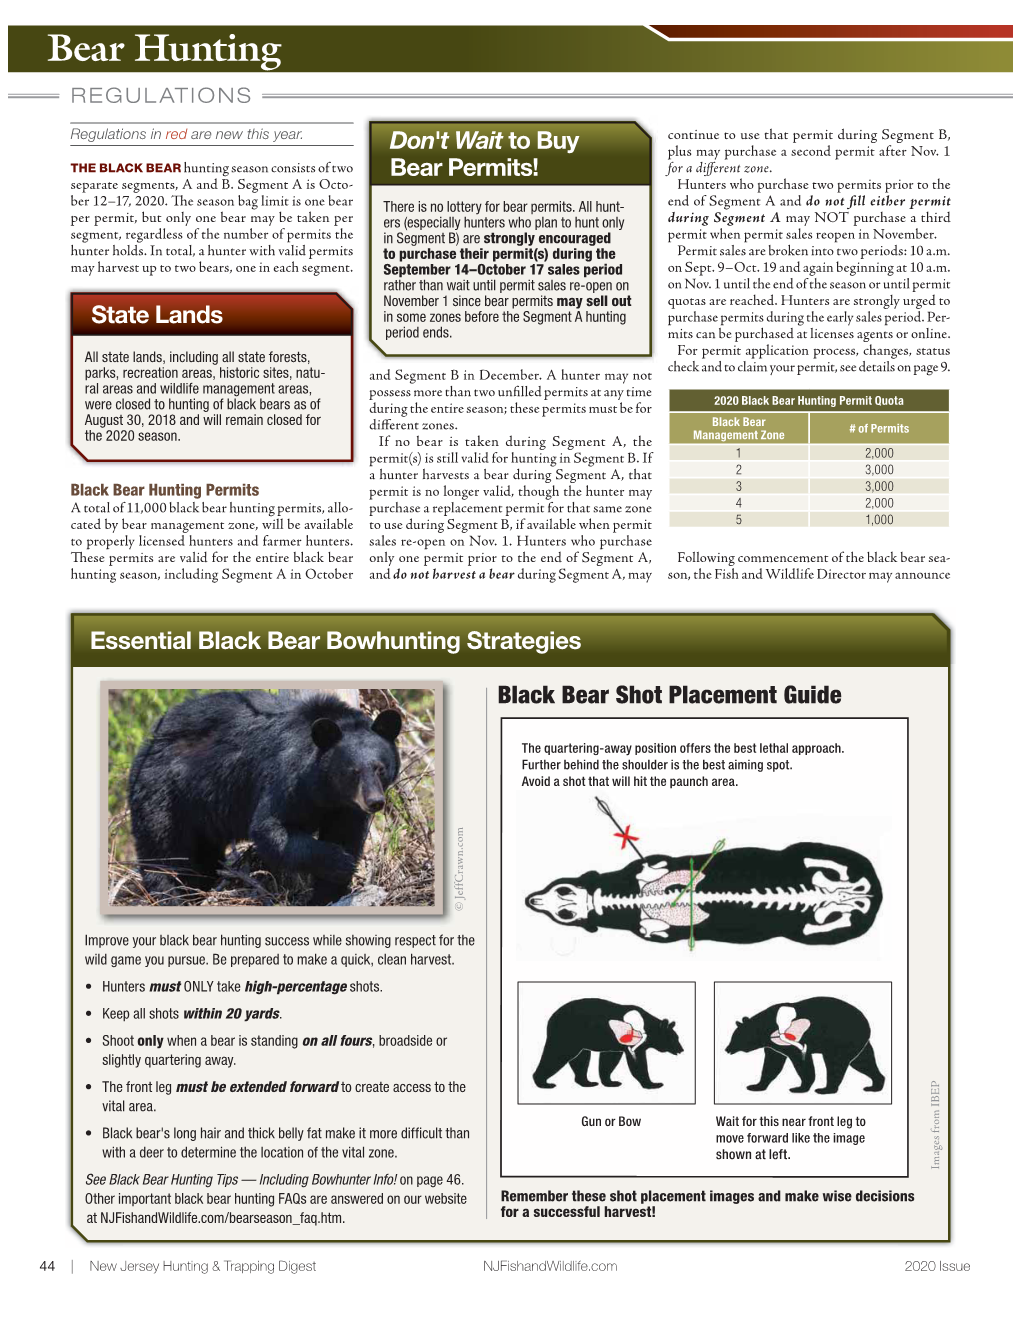 2020-21 Hunting and Trapping Digest, Pages 44-63